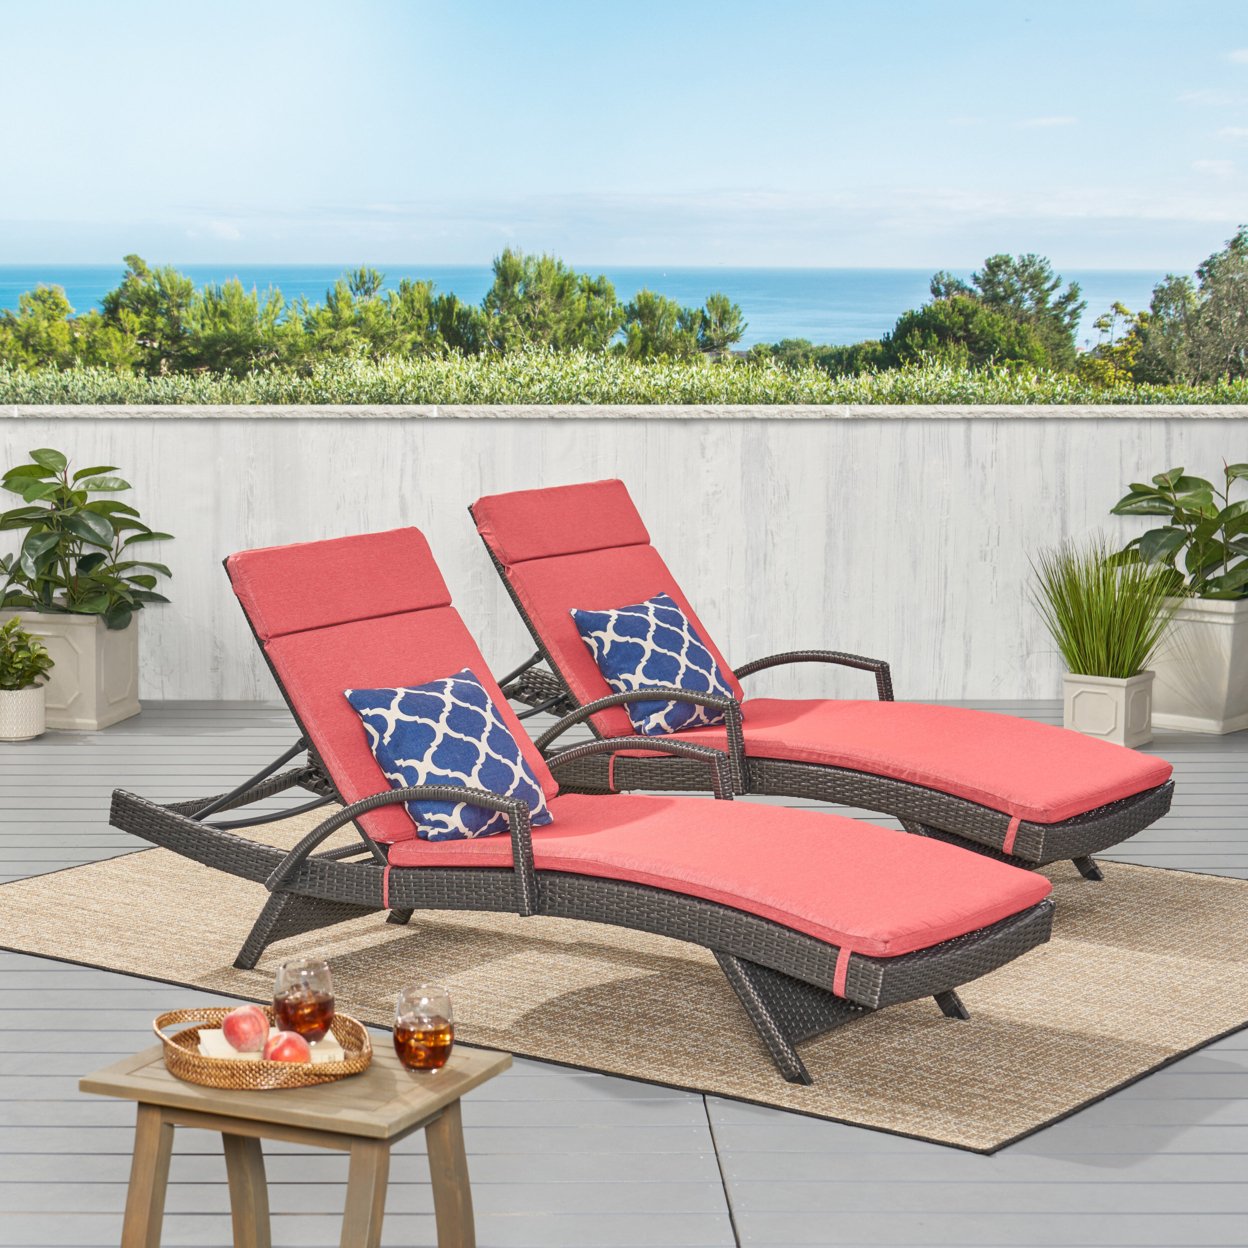 Soleil Outdoor Wicker Chaise Lounges With Water Resistant Cushions (Set Of 2) - Red